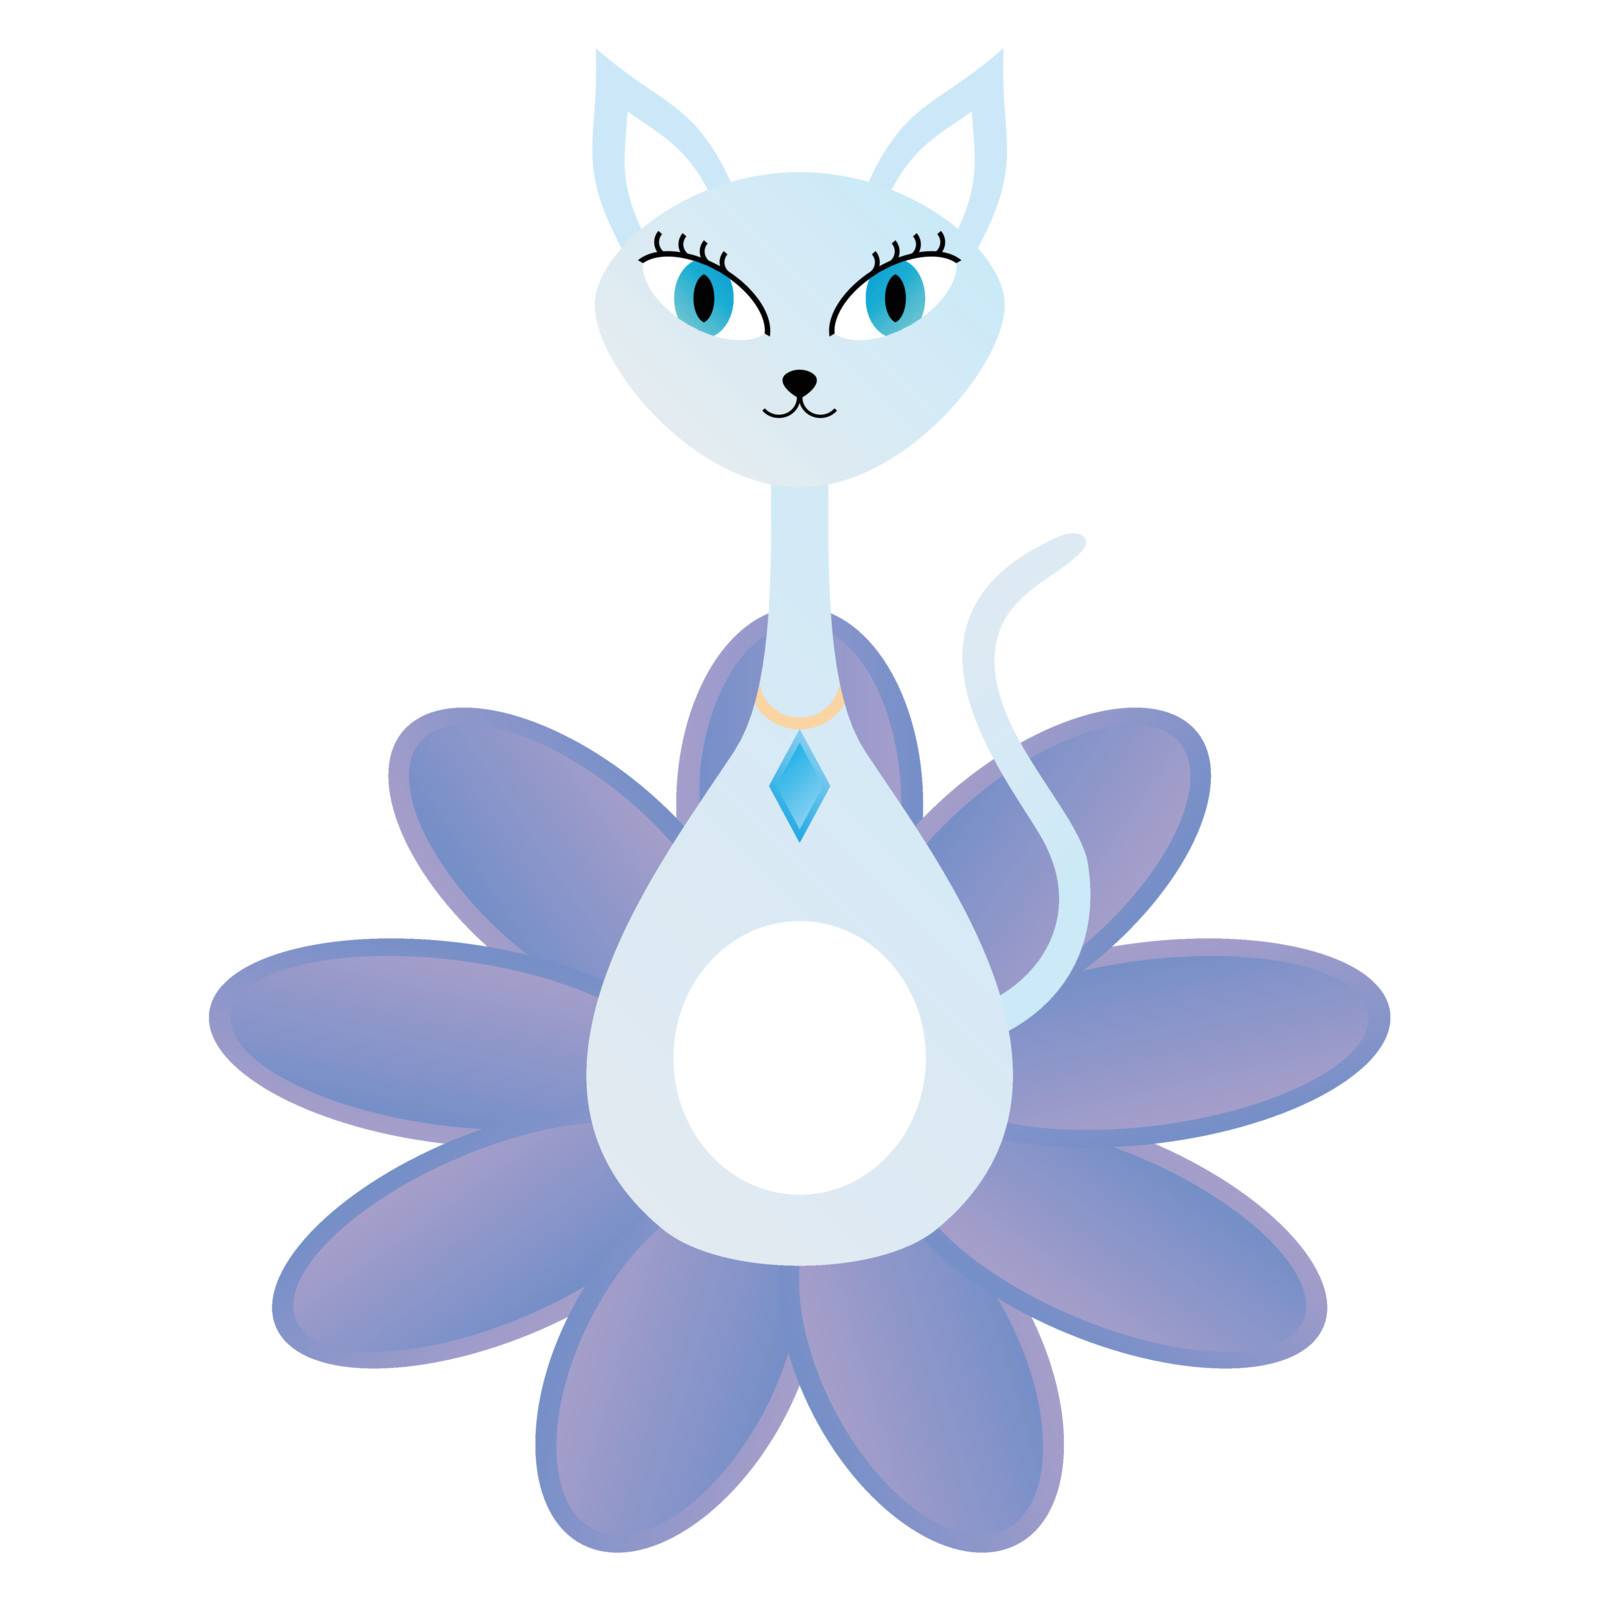 zen, cat, spa, cute, eyes, icon, lady, girl, care, gold, oils, skin, model, movie, kitty, clean, young, woman, relax, fresh, happy, facial, flower, vector, luxury, beauty, lovely, health, nature, pretty, purity, kitten, animal, outdoor, natural, graphic, elegant, diamond, therapy, massage, business, wellness, jewelery, happiness, lifestyle, beautiful, relaxation, spa stones, spa massage, spa treatment